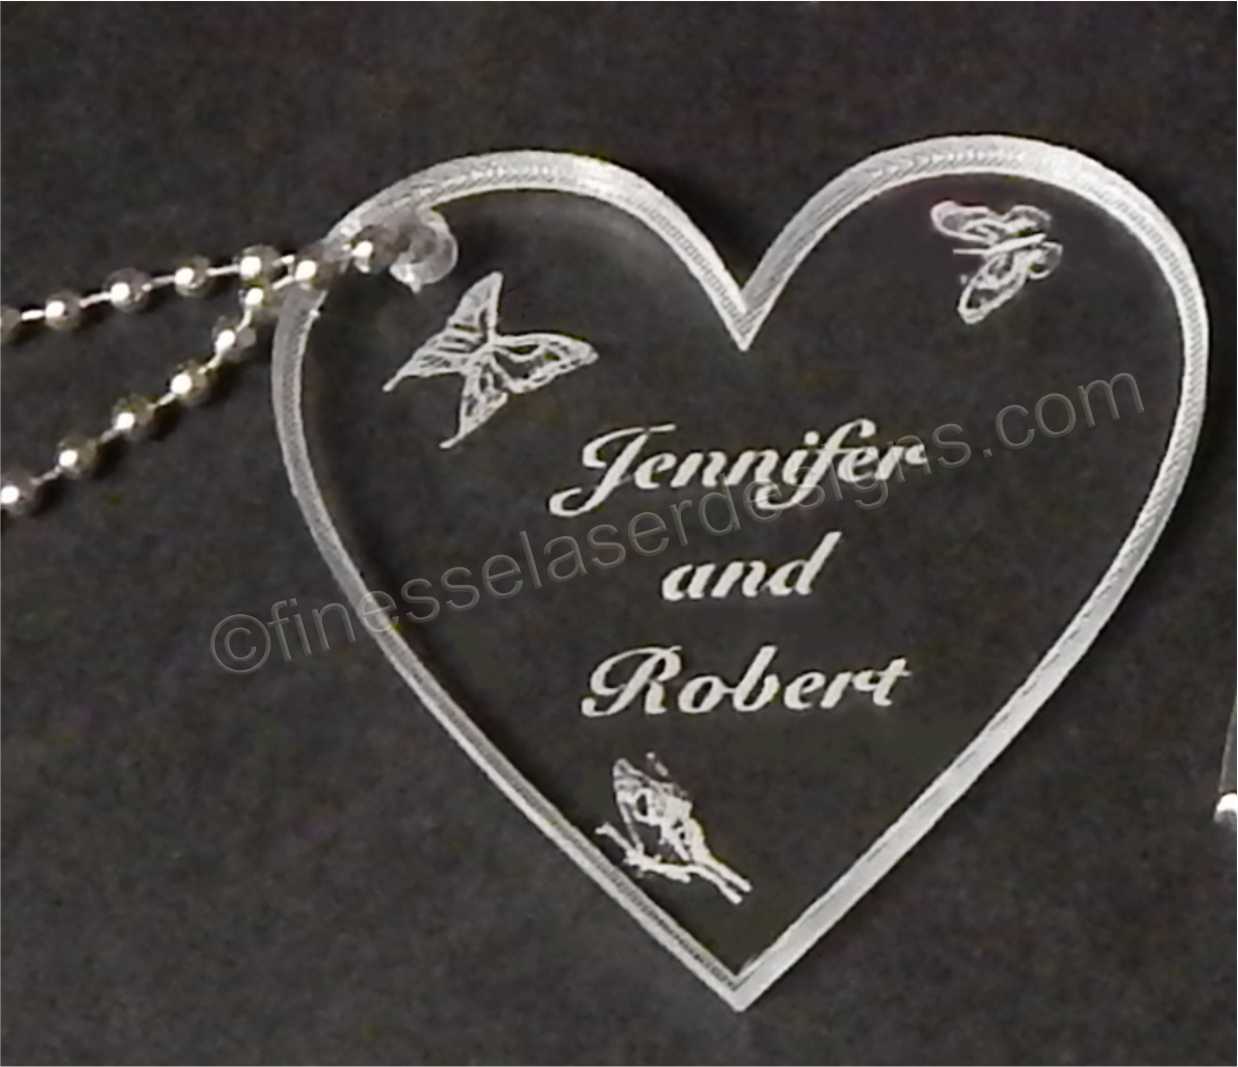 acrylic heart shaped keychain with butterflies and names engraved along with small metal chain attached